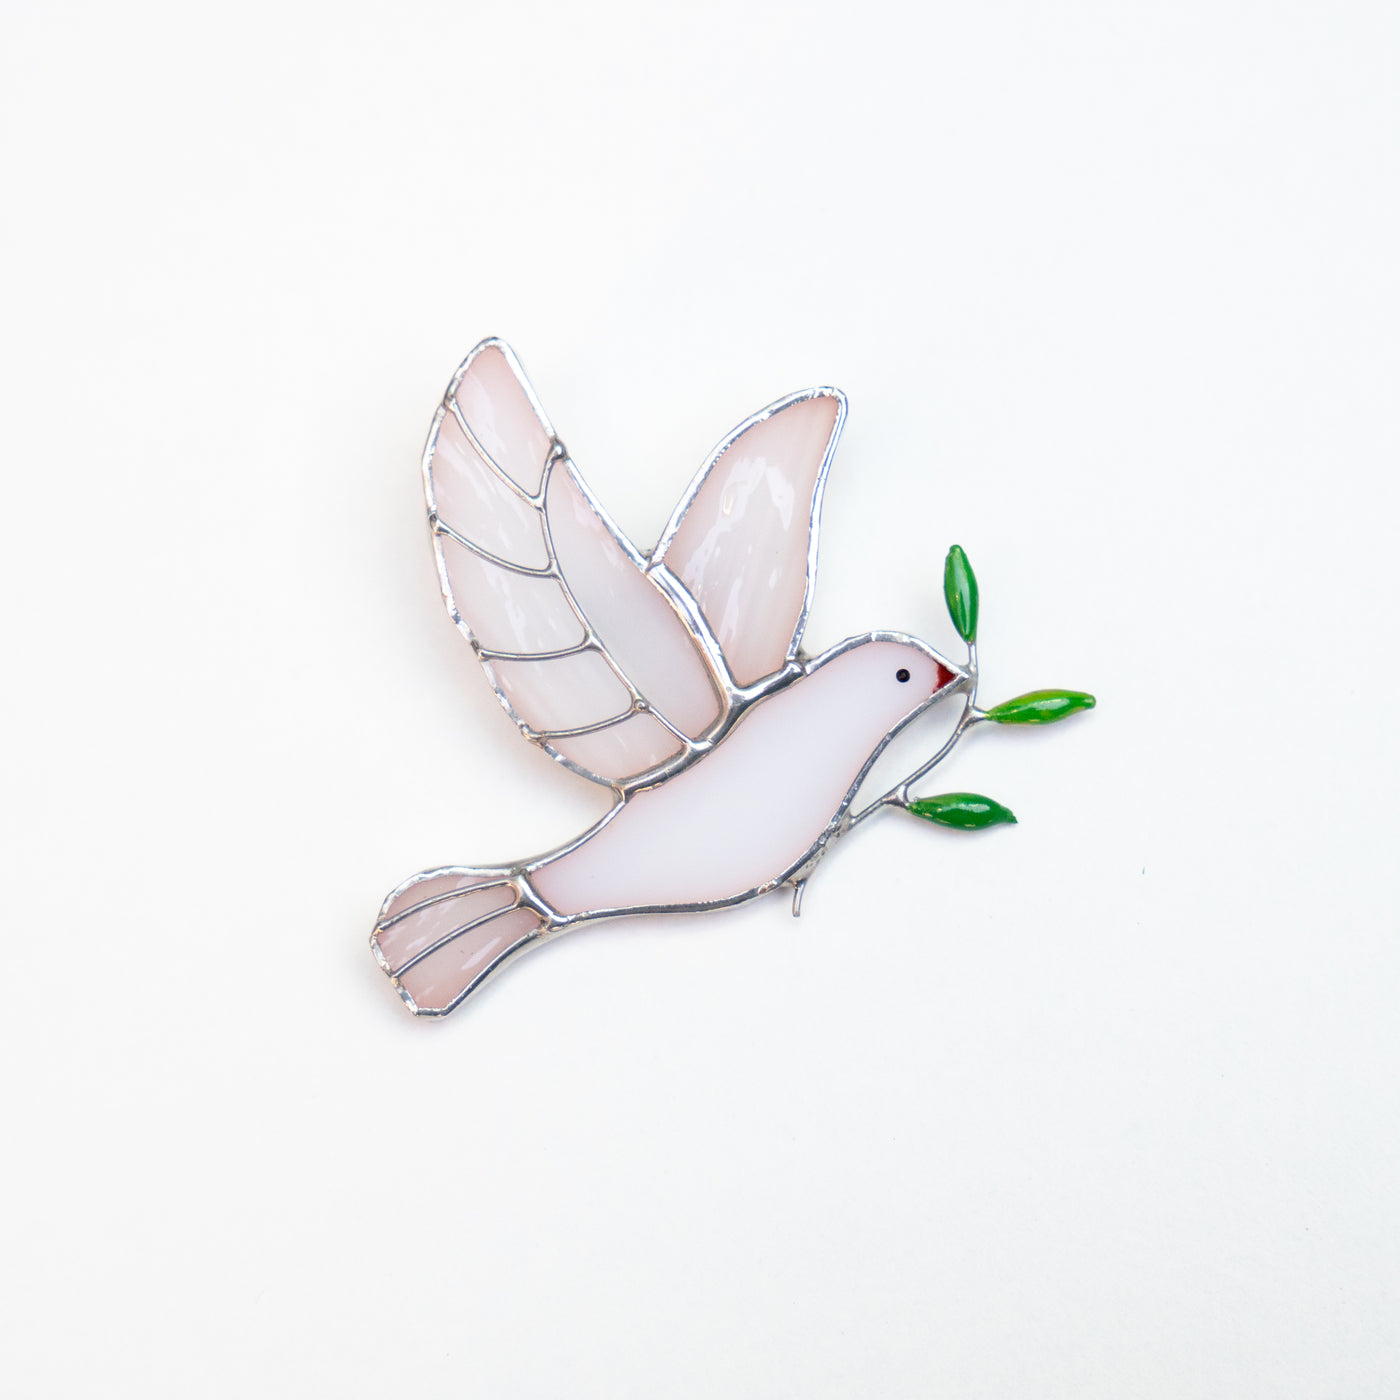 Stained glass pin of a dove of peace